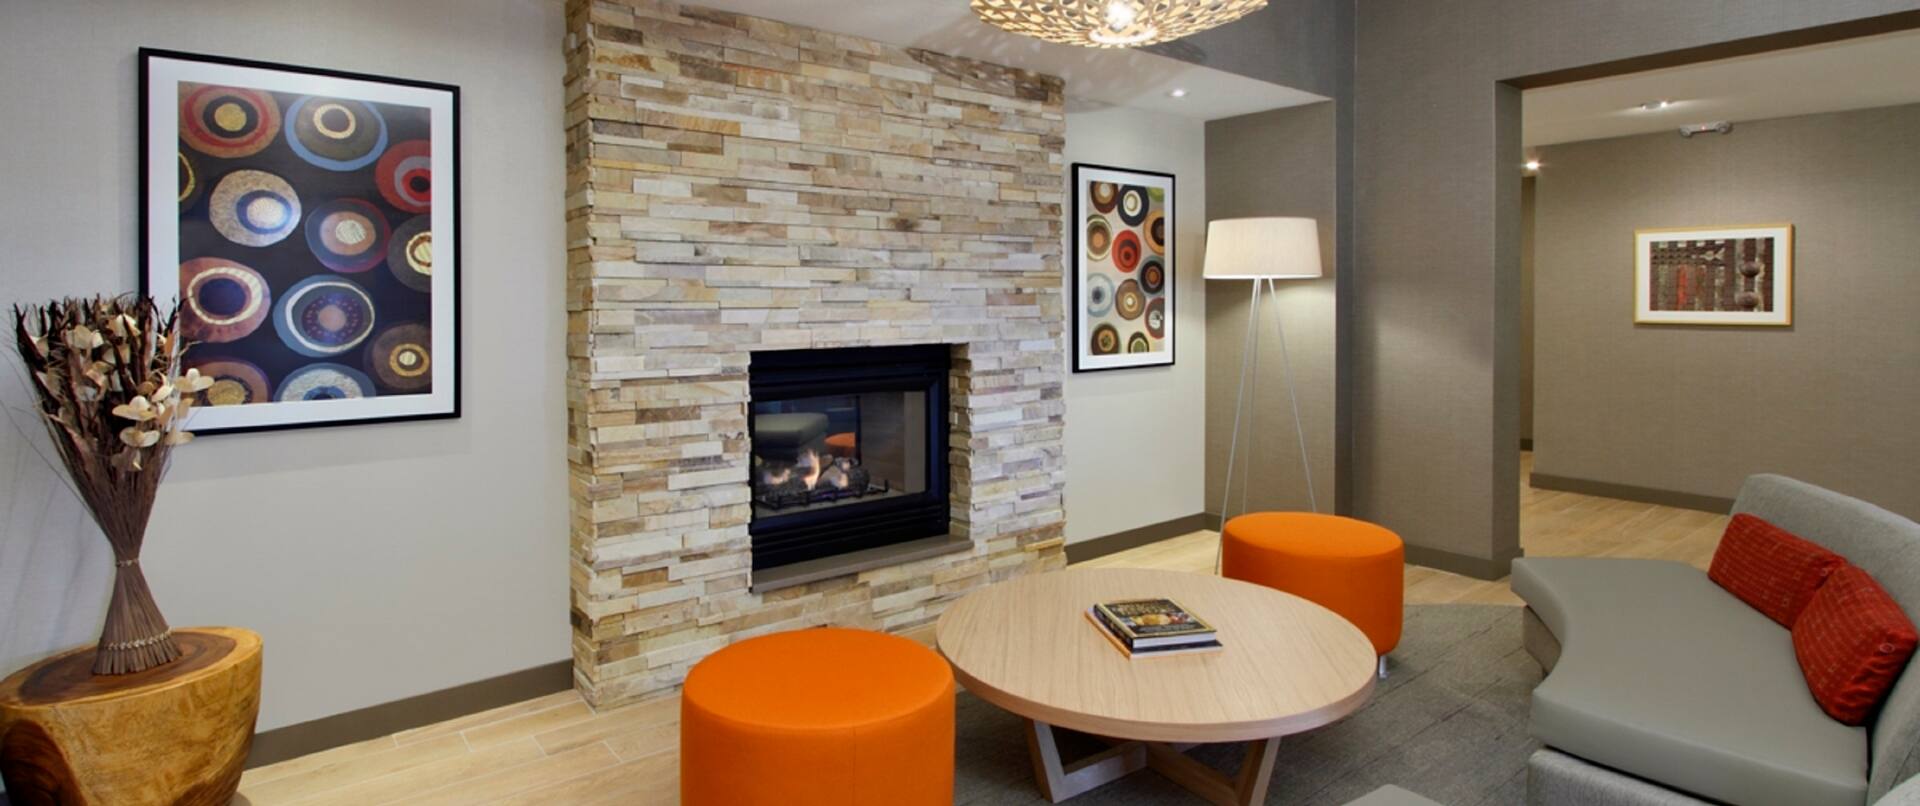 Fireplace Sitting Area With Wall Art, Round Table, Two Orange Ottomans, Floor Lamp and Two Sofas